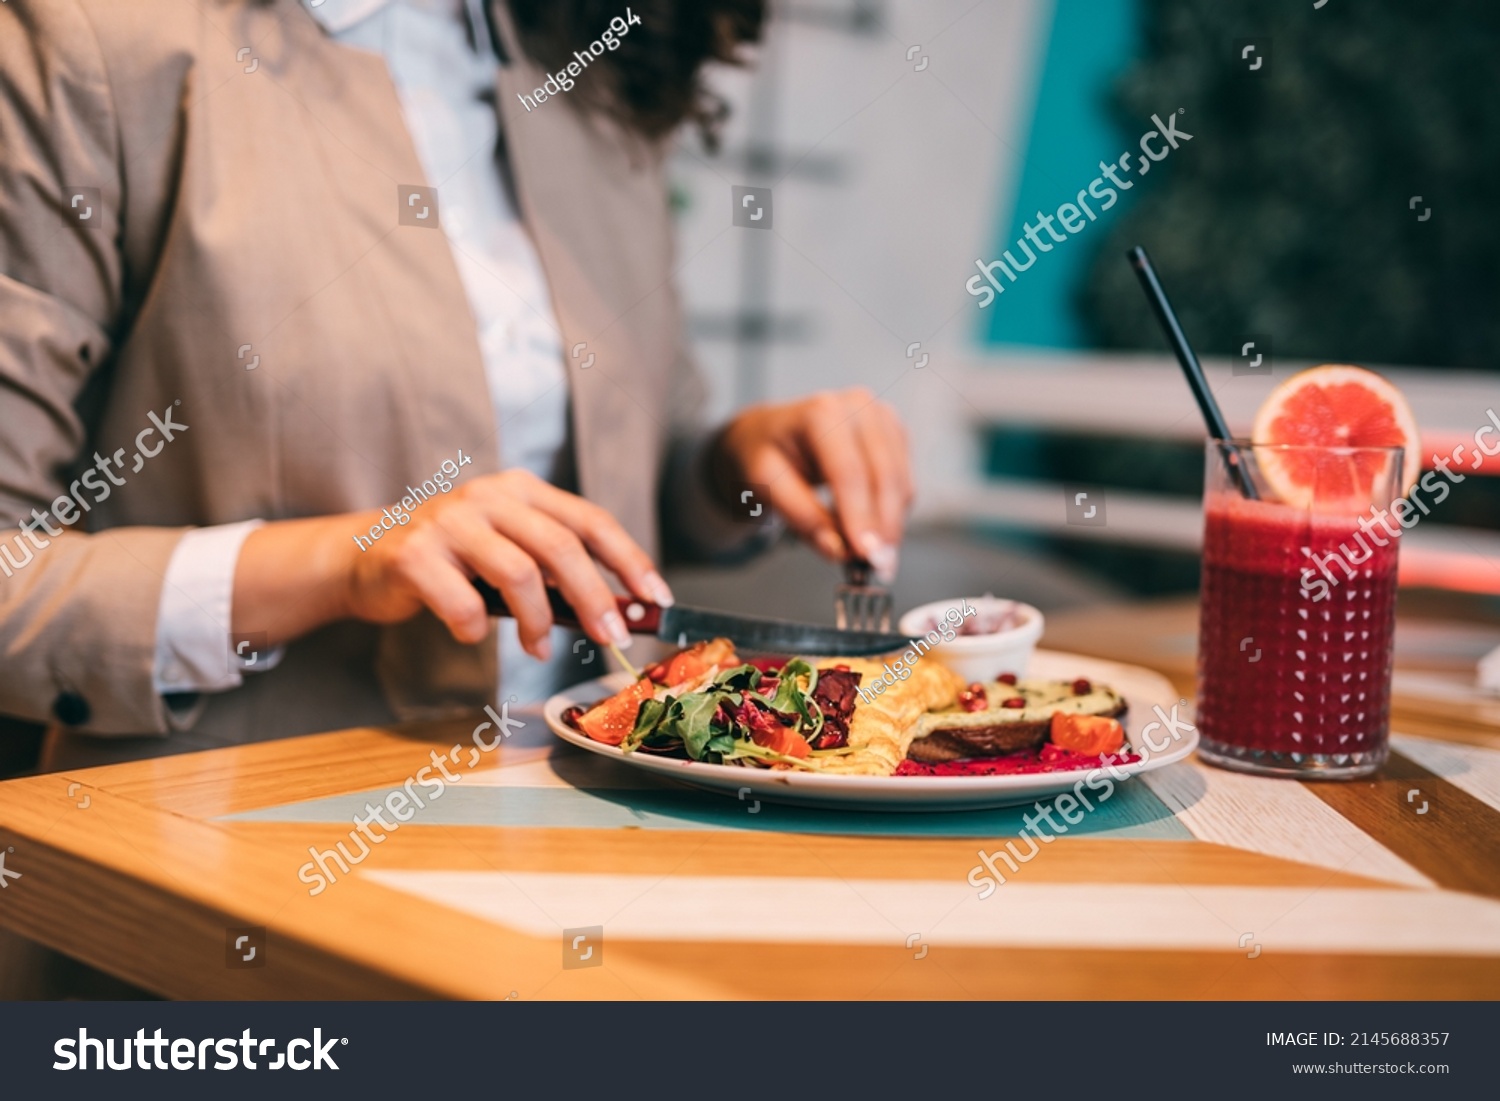 A middle-aged businesswoman enjoys a healthy meal and fresh beetroot and grapefruit juice at the organic food restaurant. #2145688357